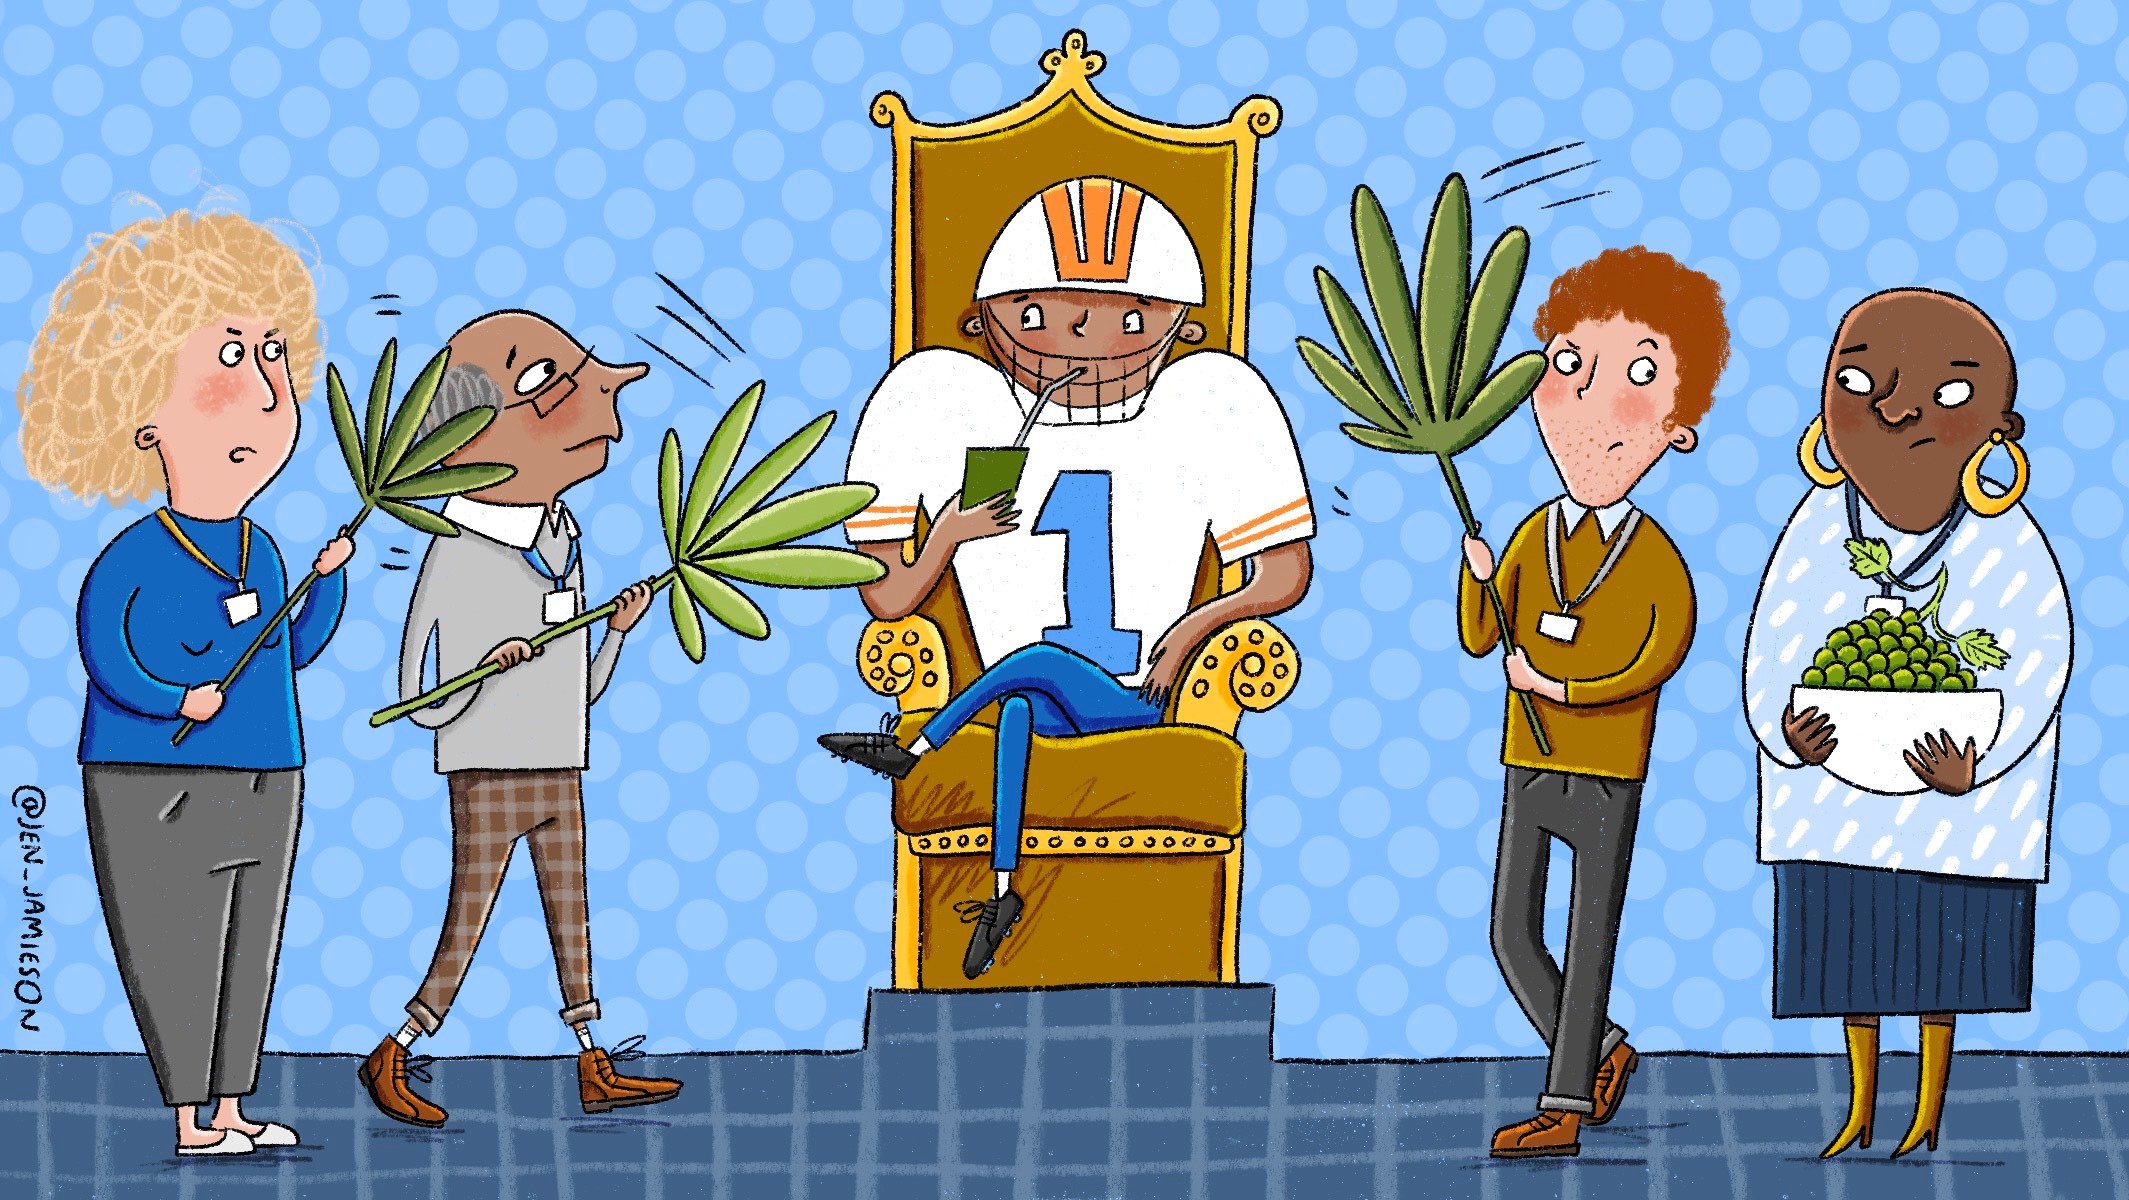 Illustration of football player being fanned by teachers